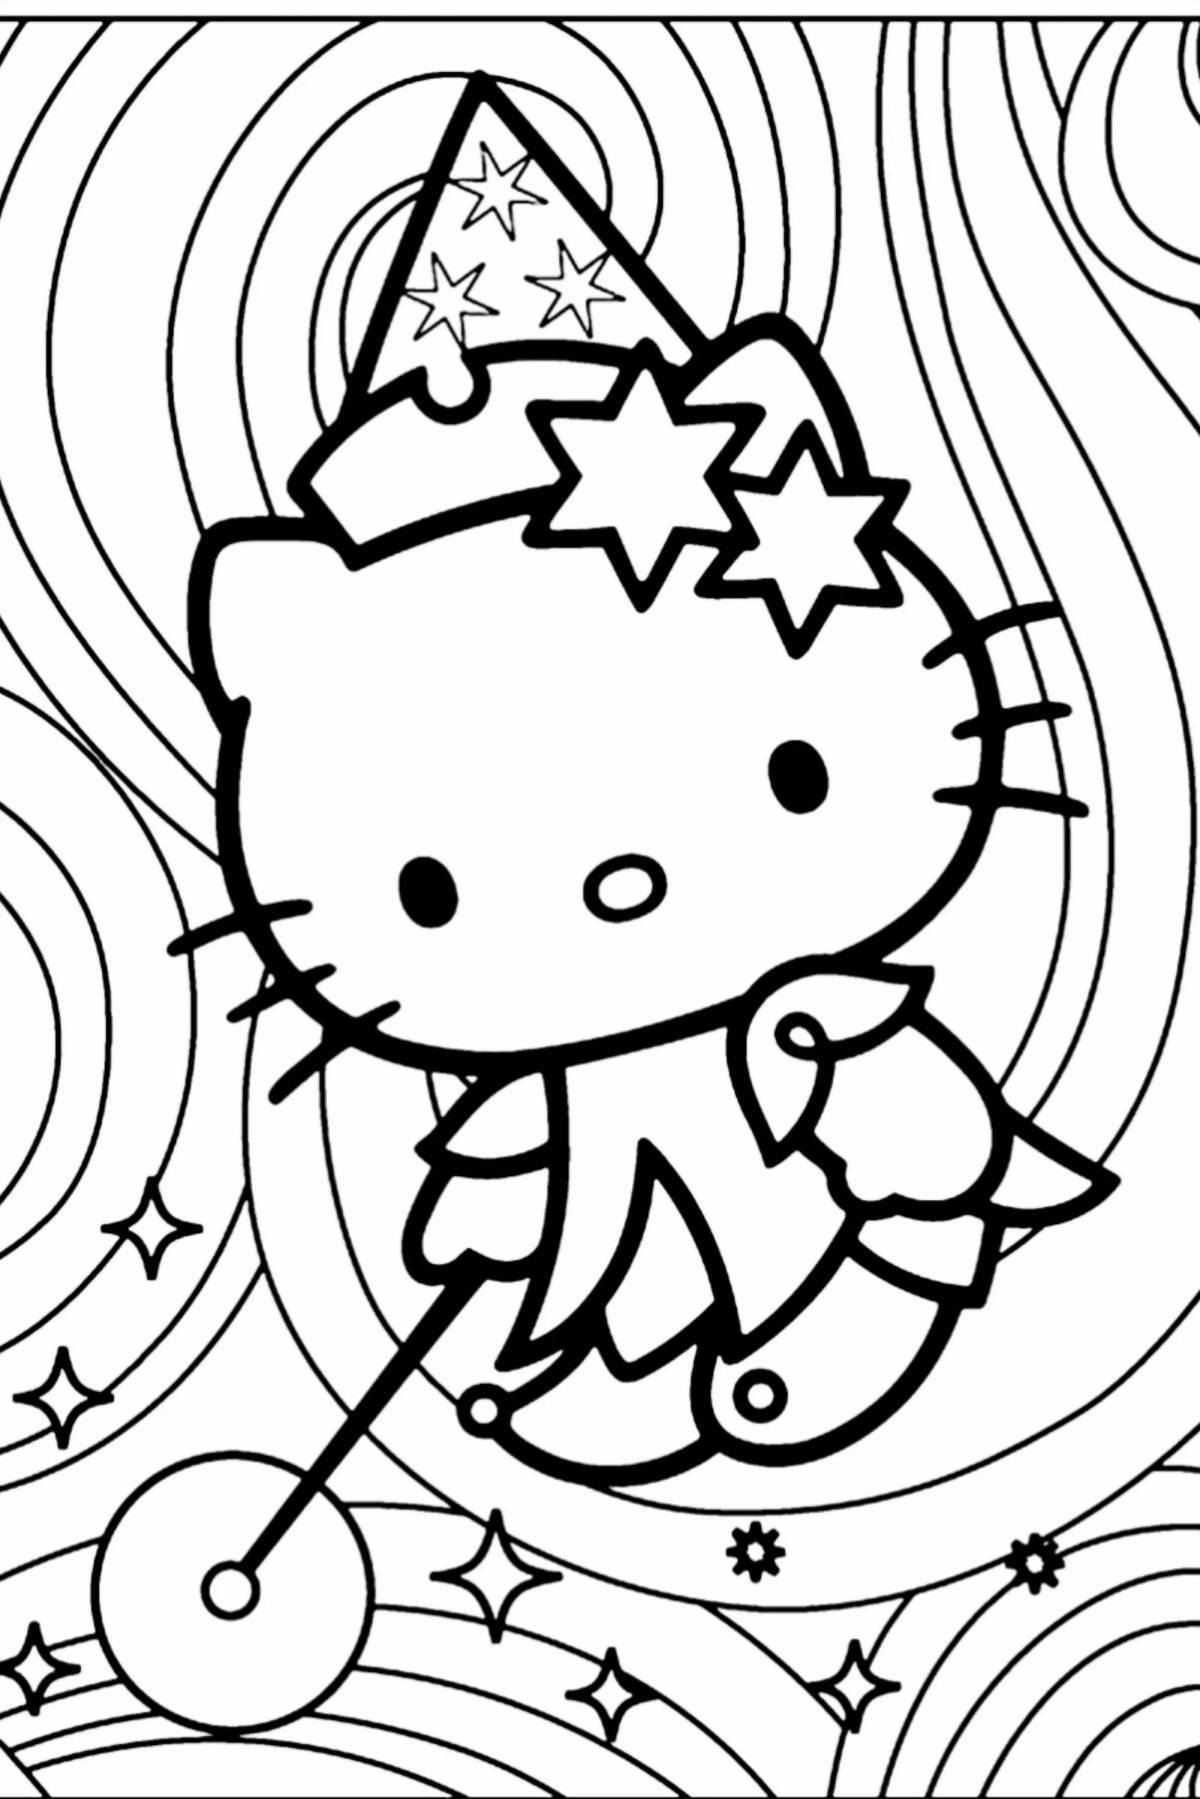 Astro kitty quirky coloring book